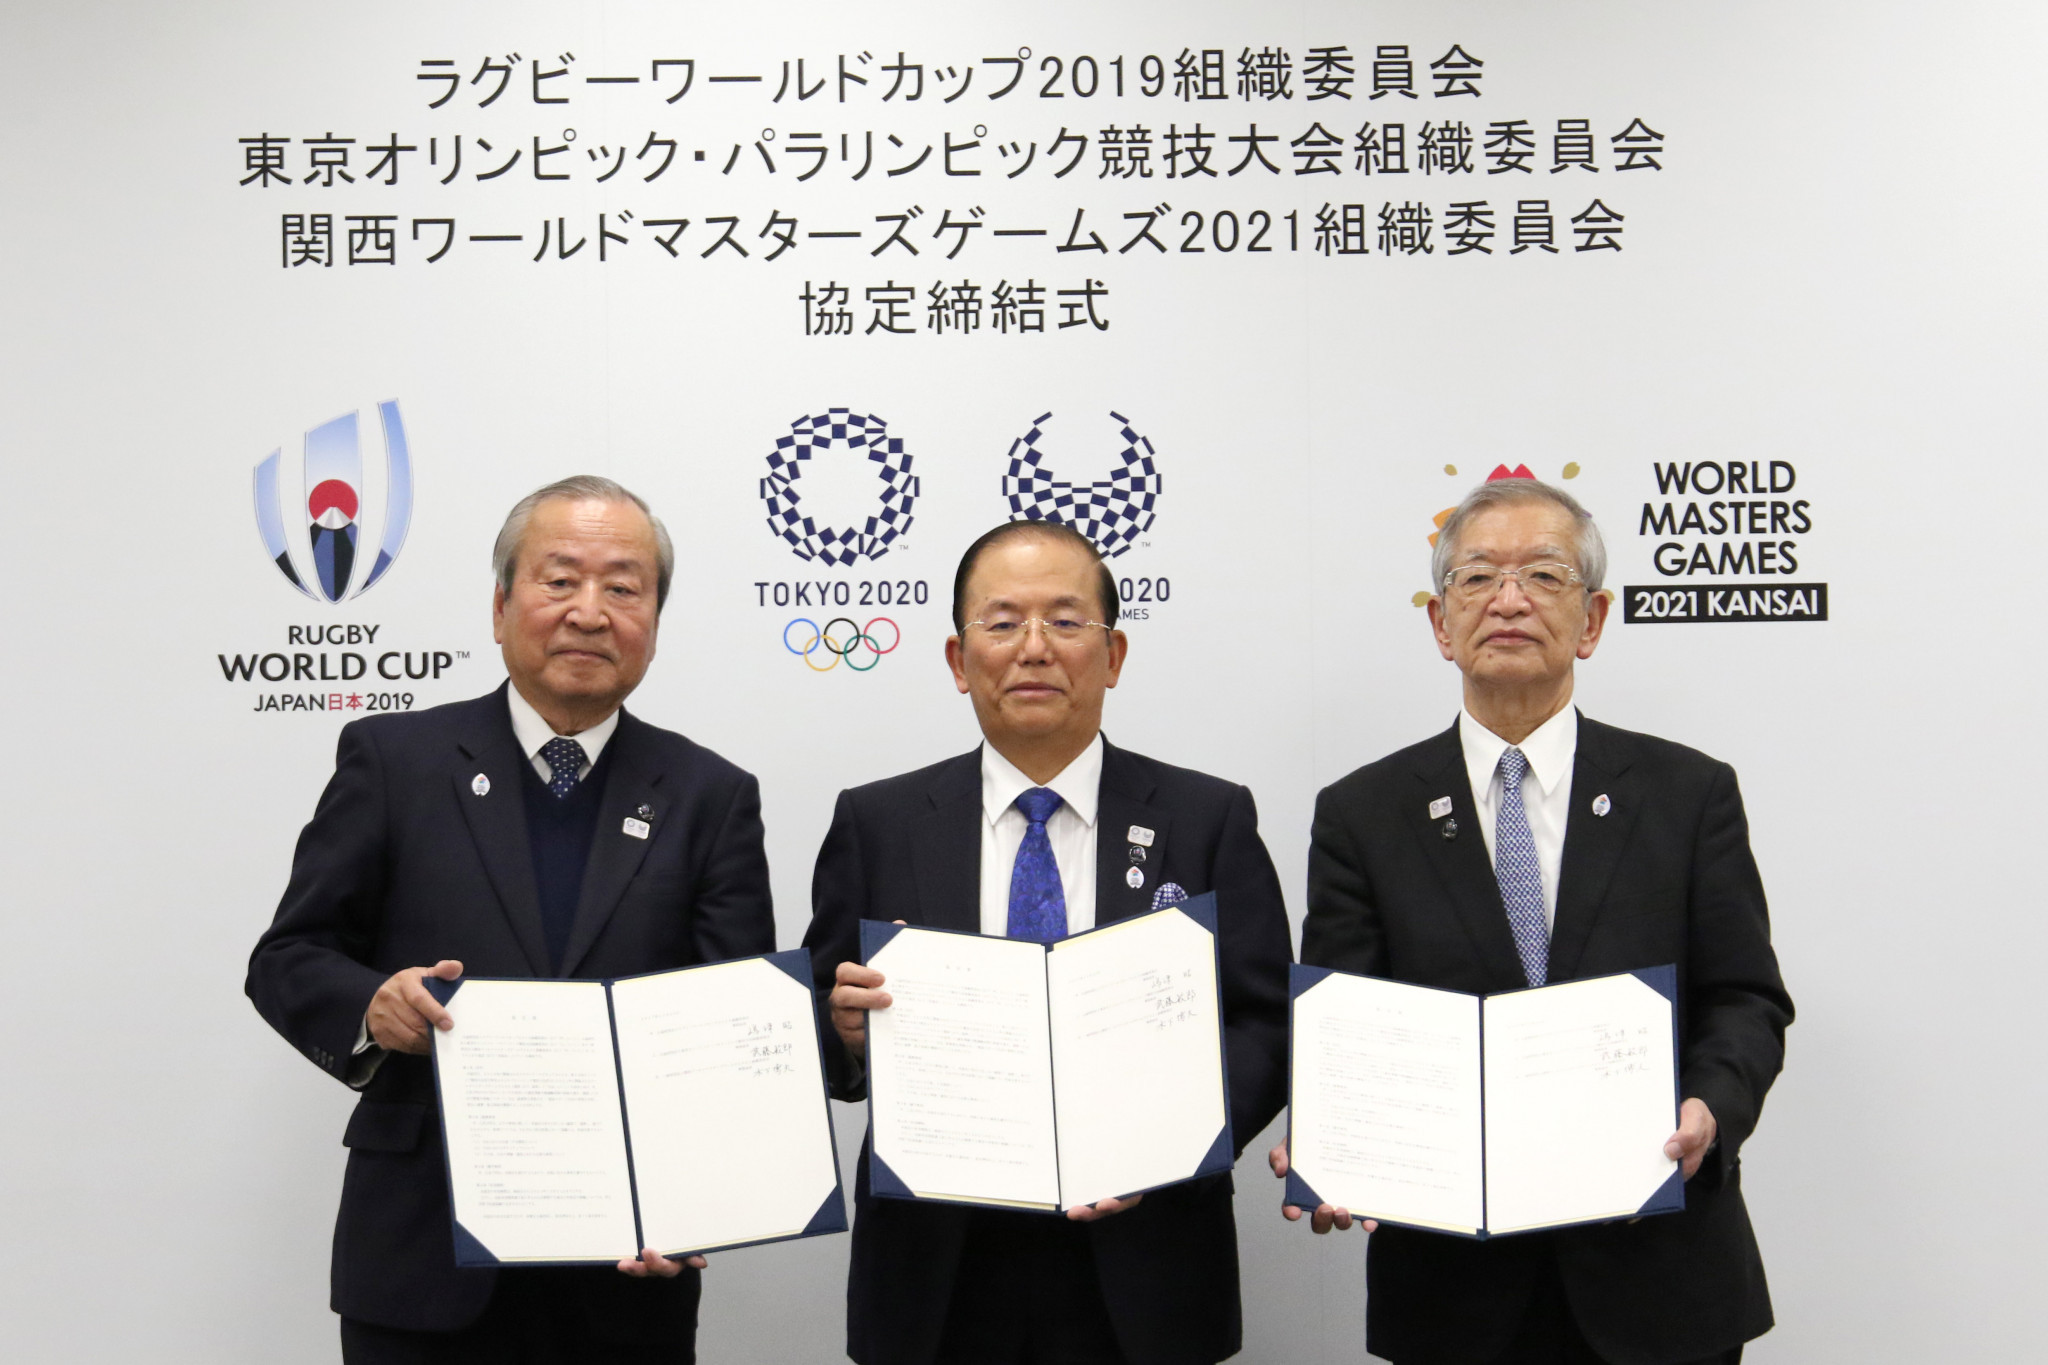 Tokyo 2020 enter partnership agreement with 2019 Rugby World Cup and 2021 World Masters Games